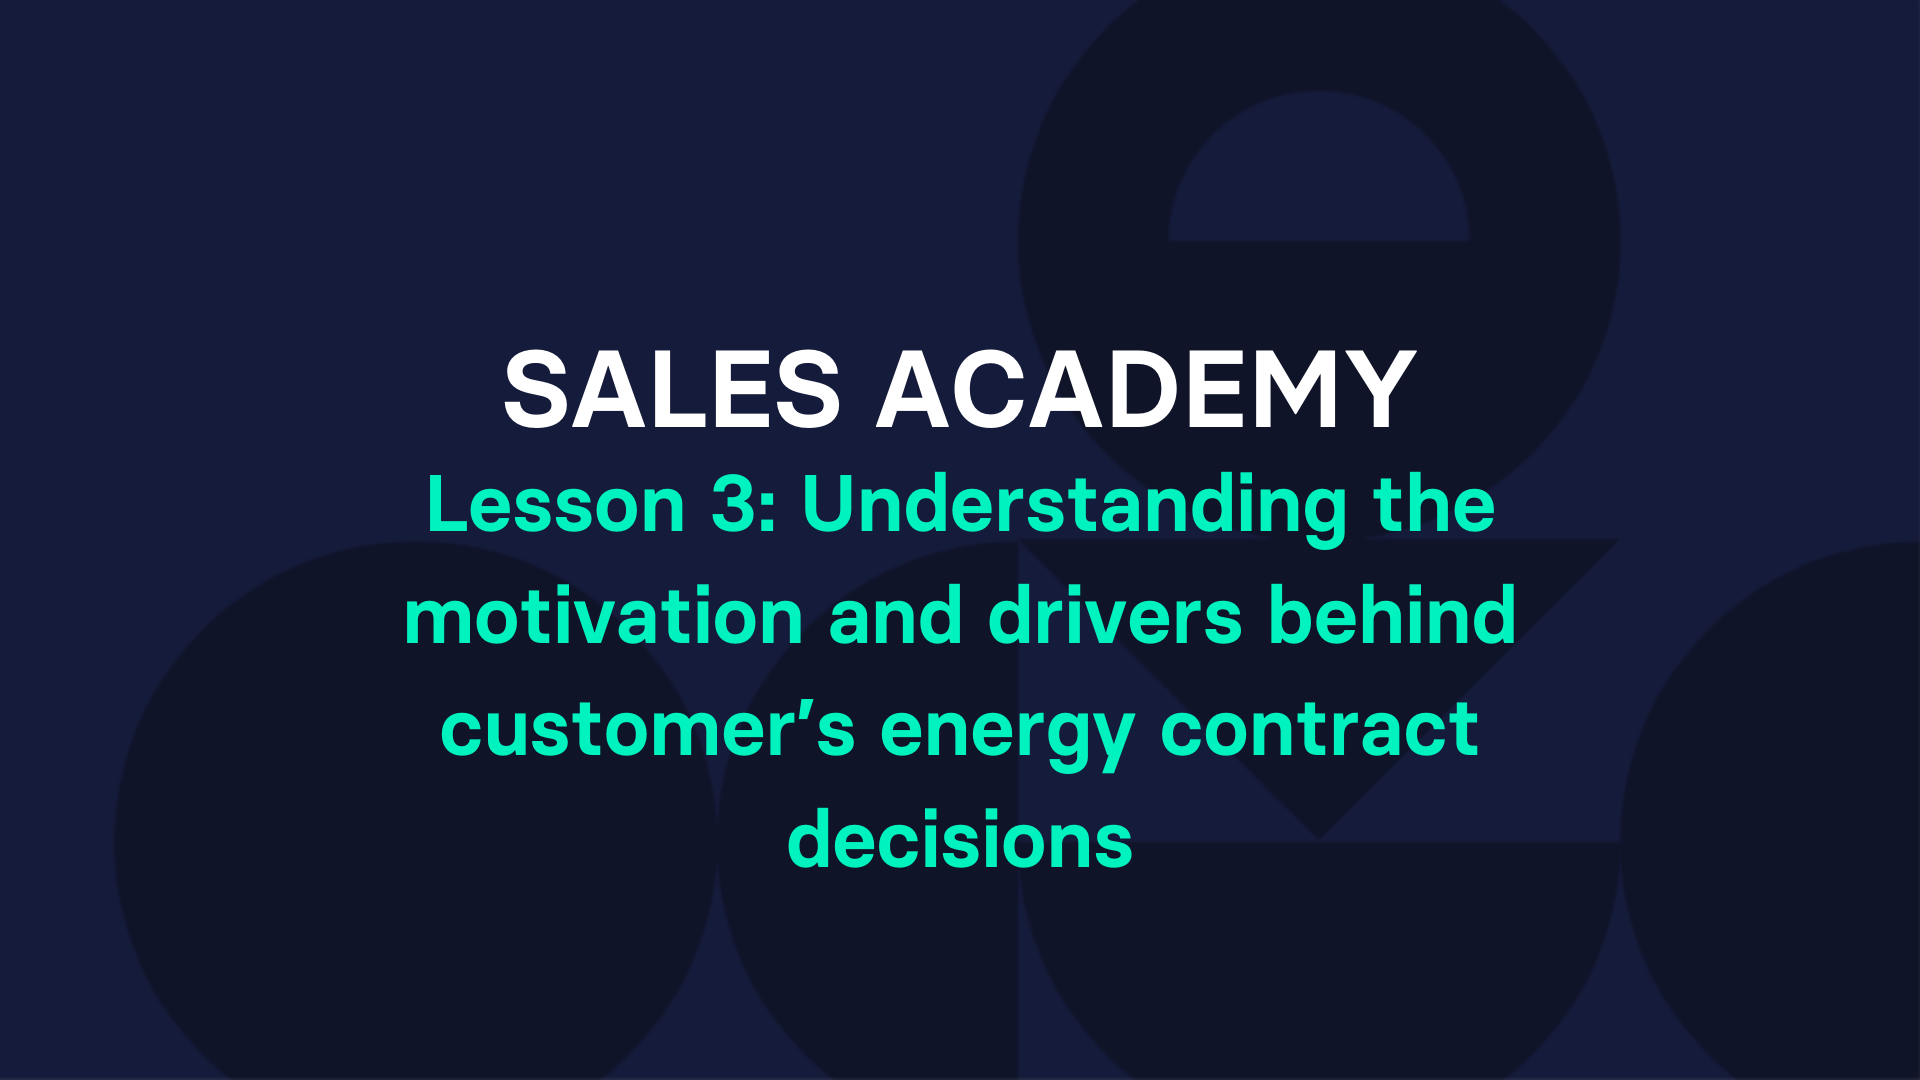 Lesson 3: Understanding the motivation and drivers behind customer’s energy contract decisions